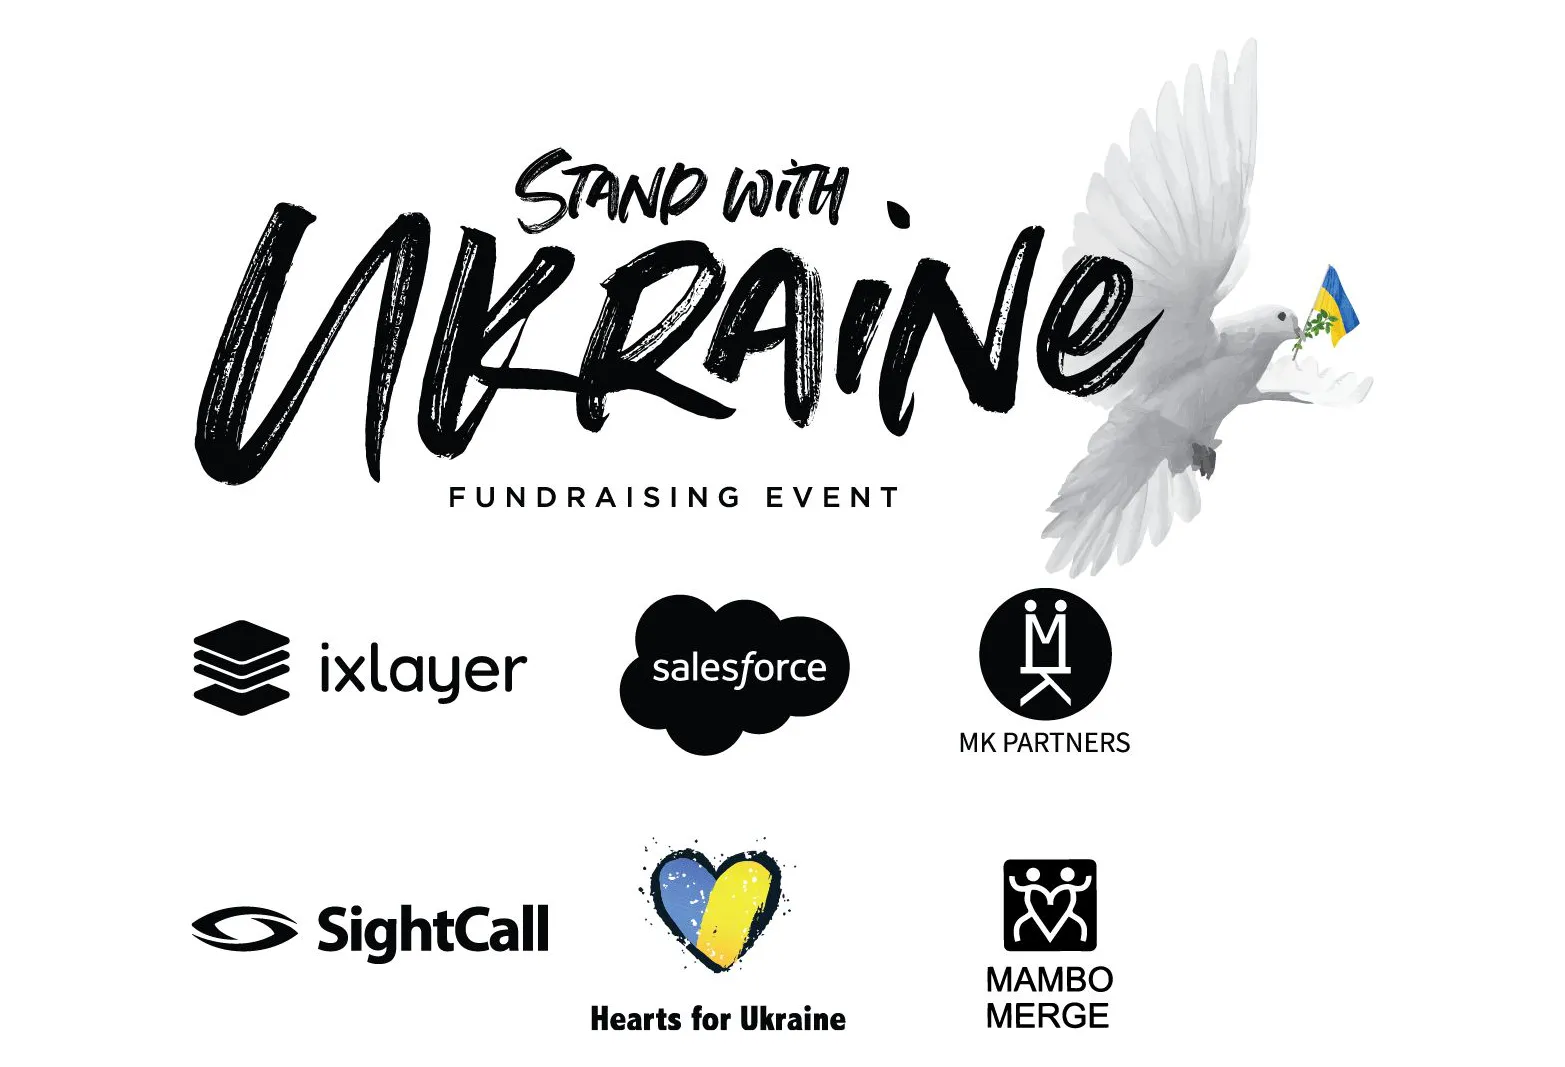 Join Us in Raising Money (and in person, if you can) for Those in Need in Ukraine